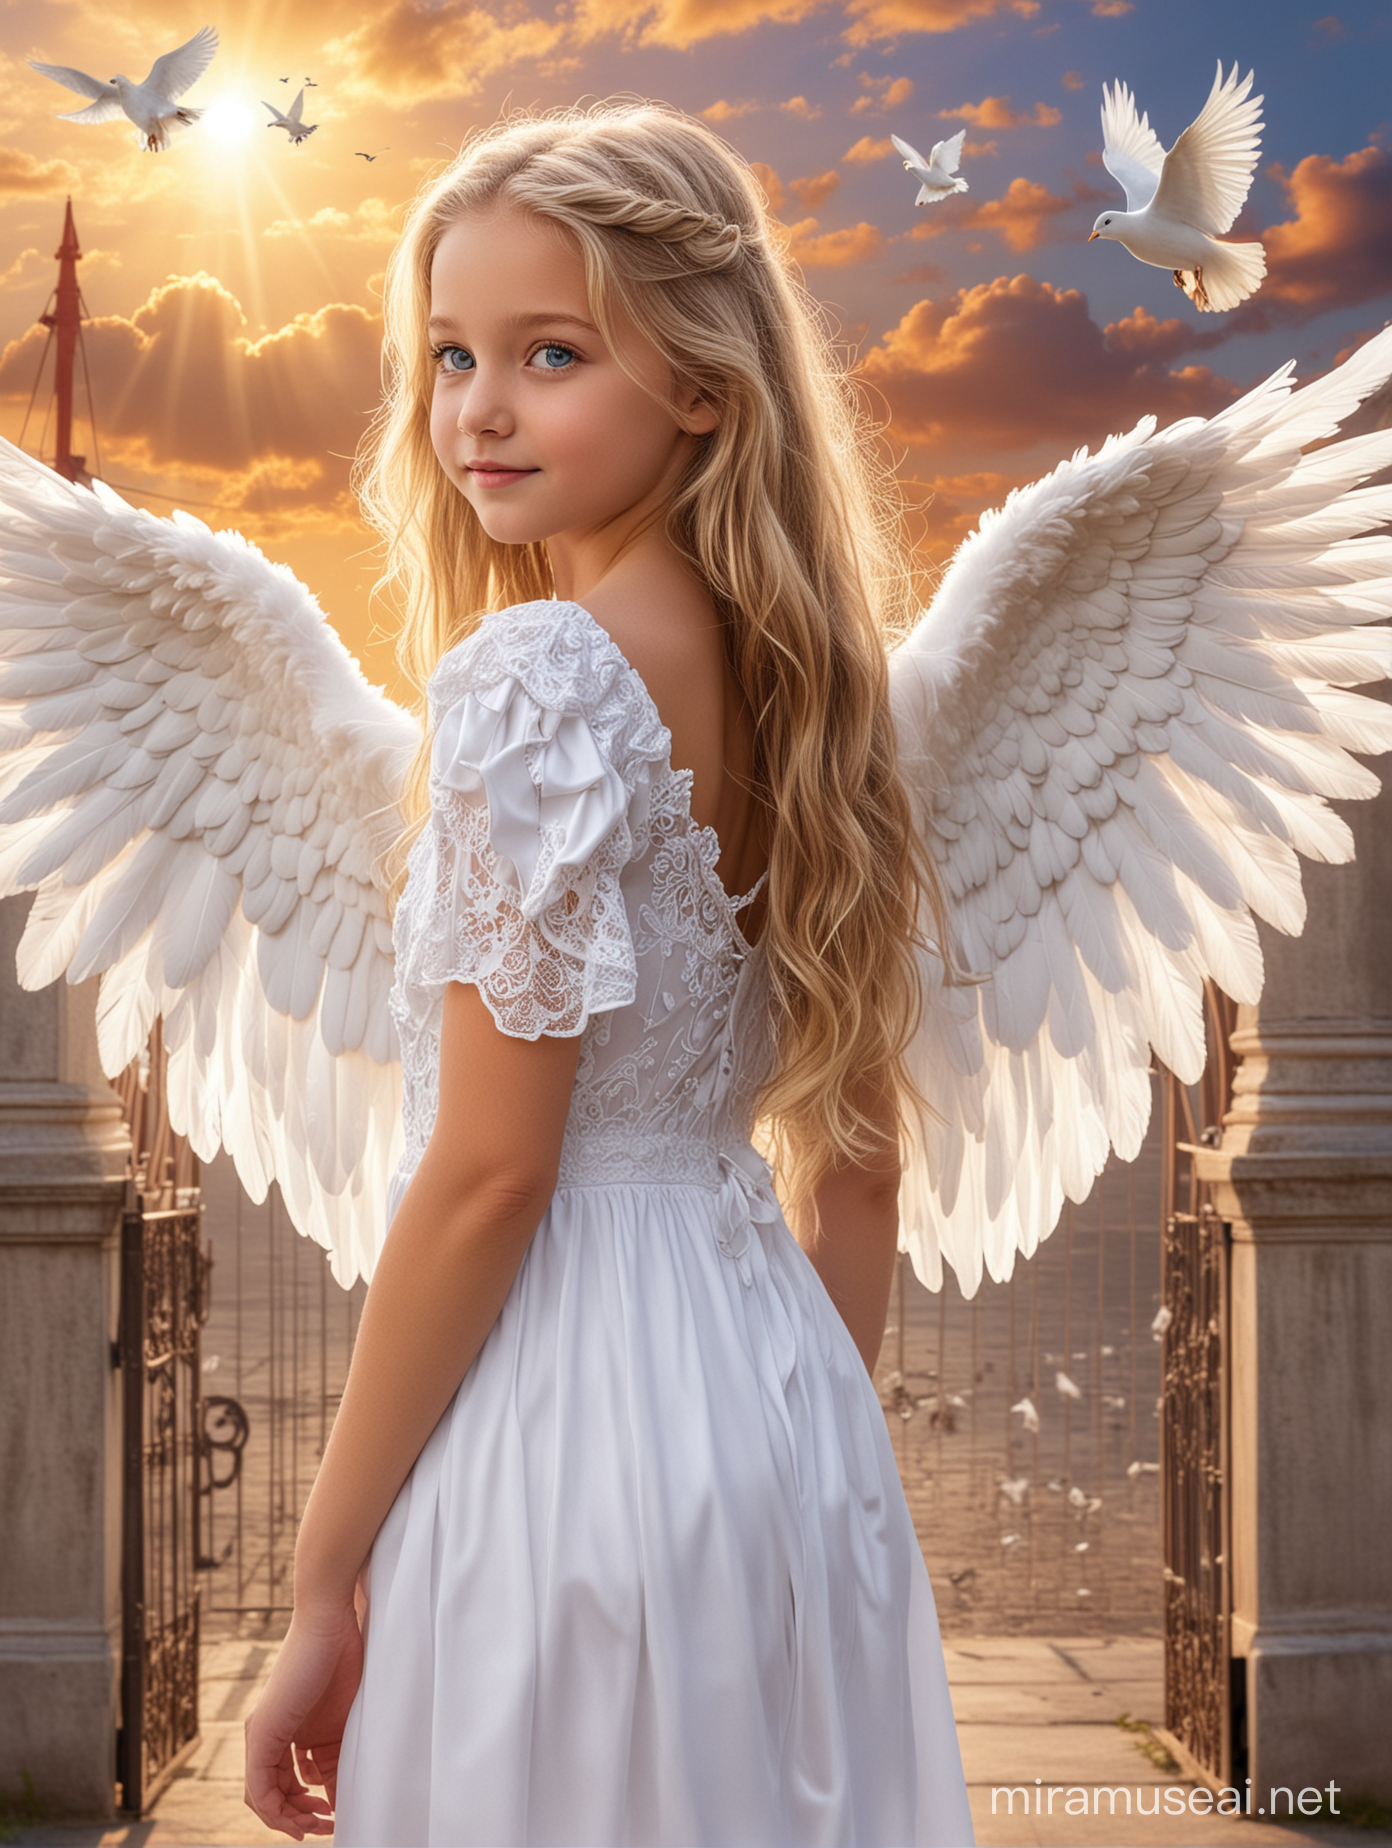 Heavenly Angel Girl with White Dress and Wings in Golden Gate Landscape